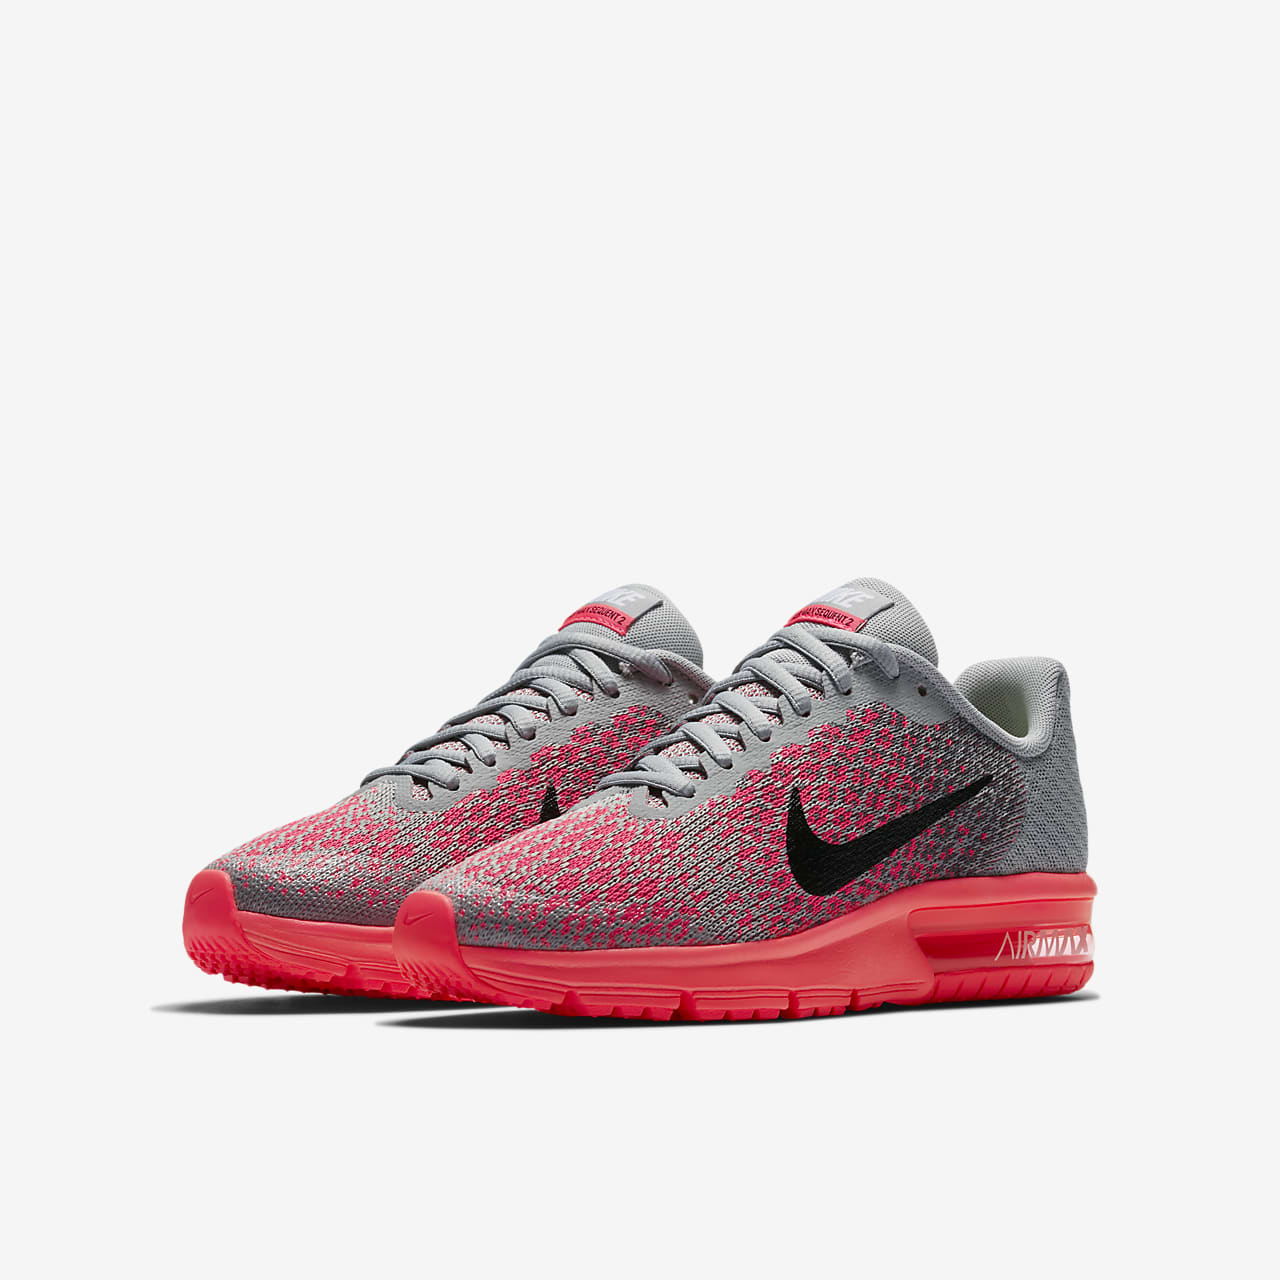 nike air max sequent 2 grey